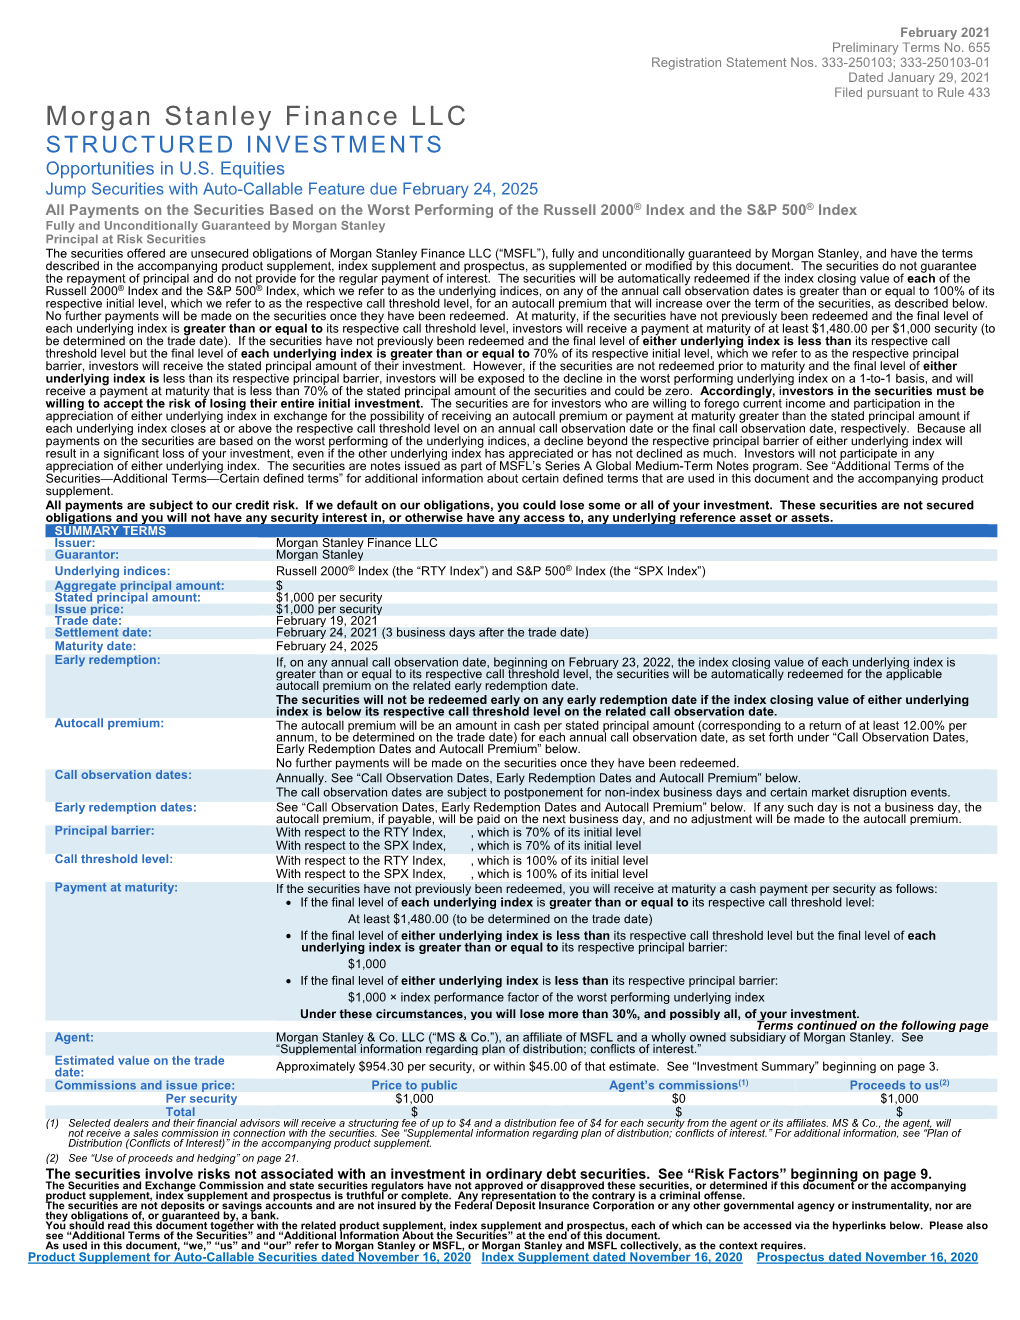 Morgan Stanley Finance LLC STRUCTURED INVESTMENTS Opportunities in U.S